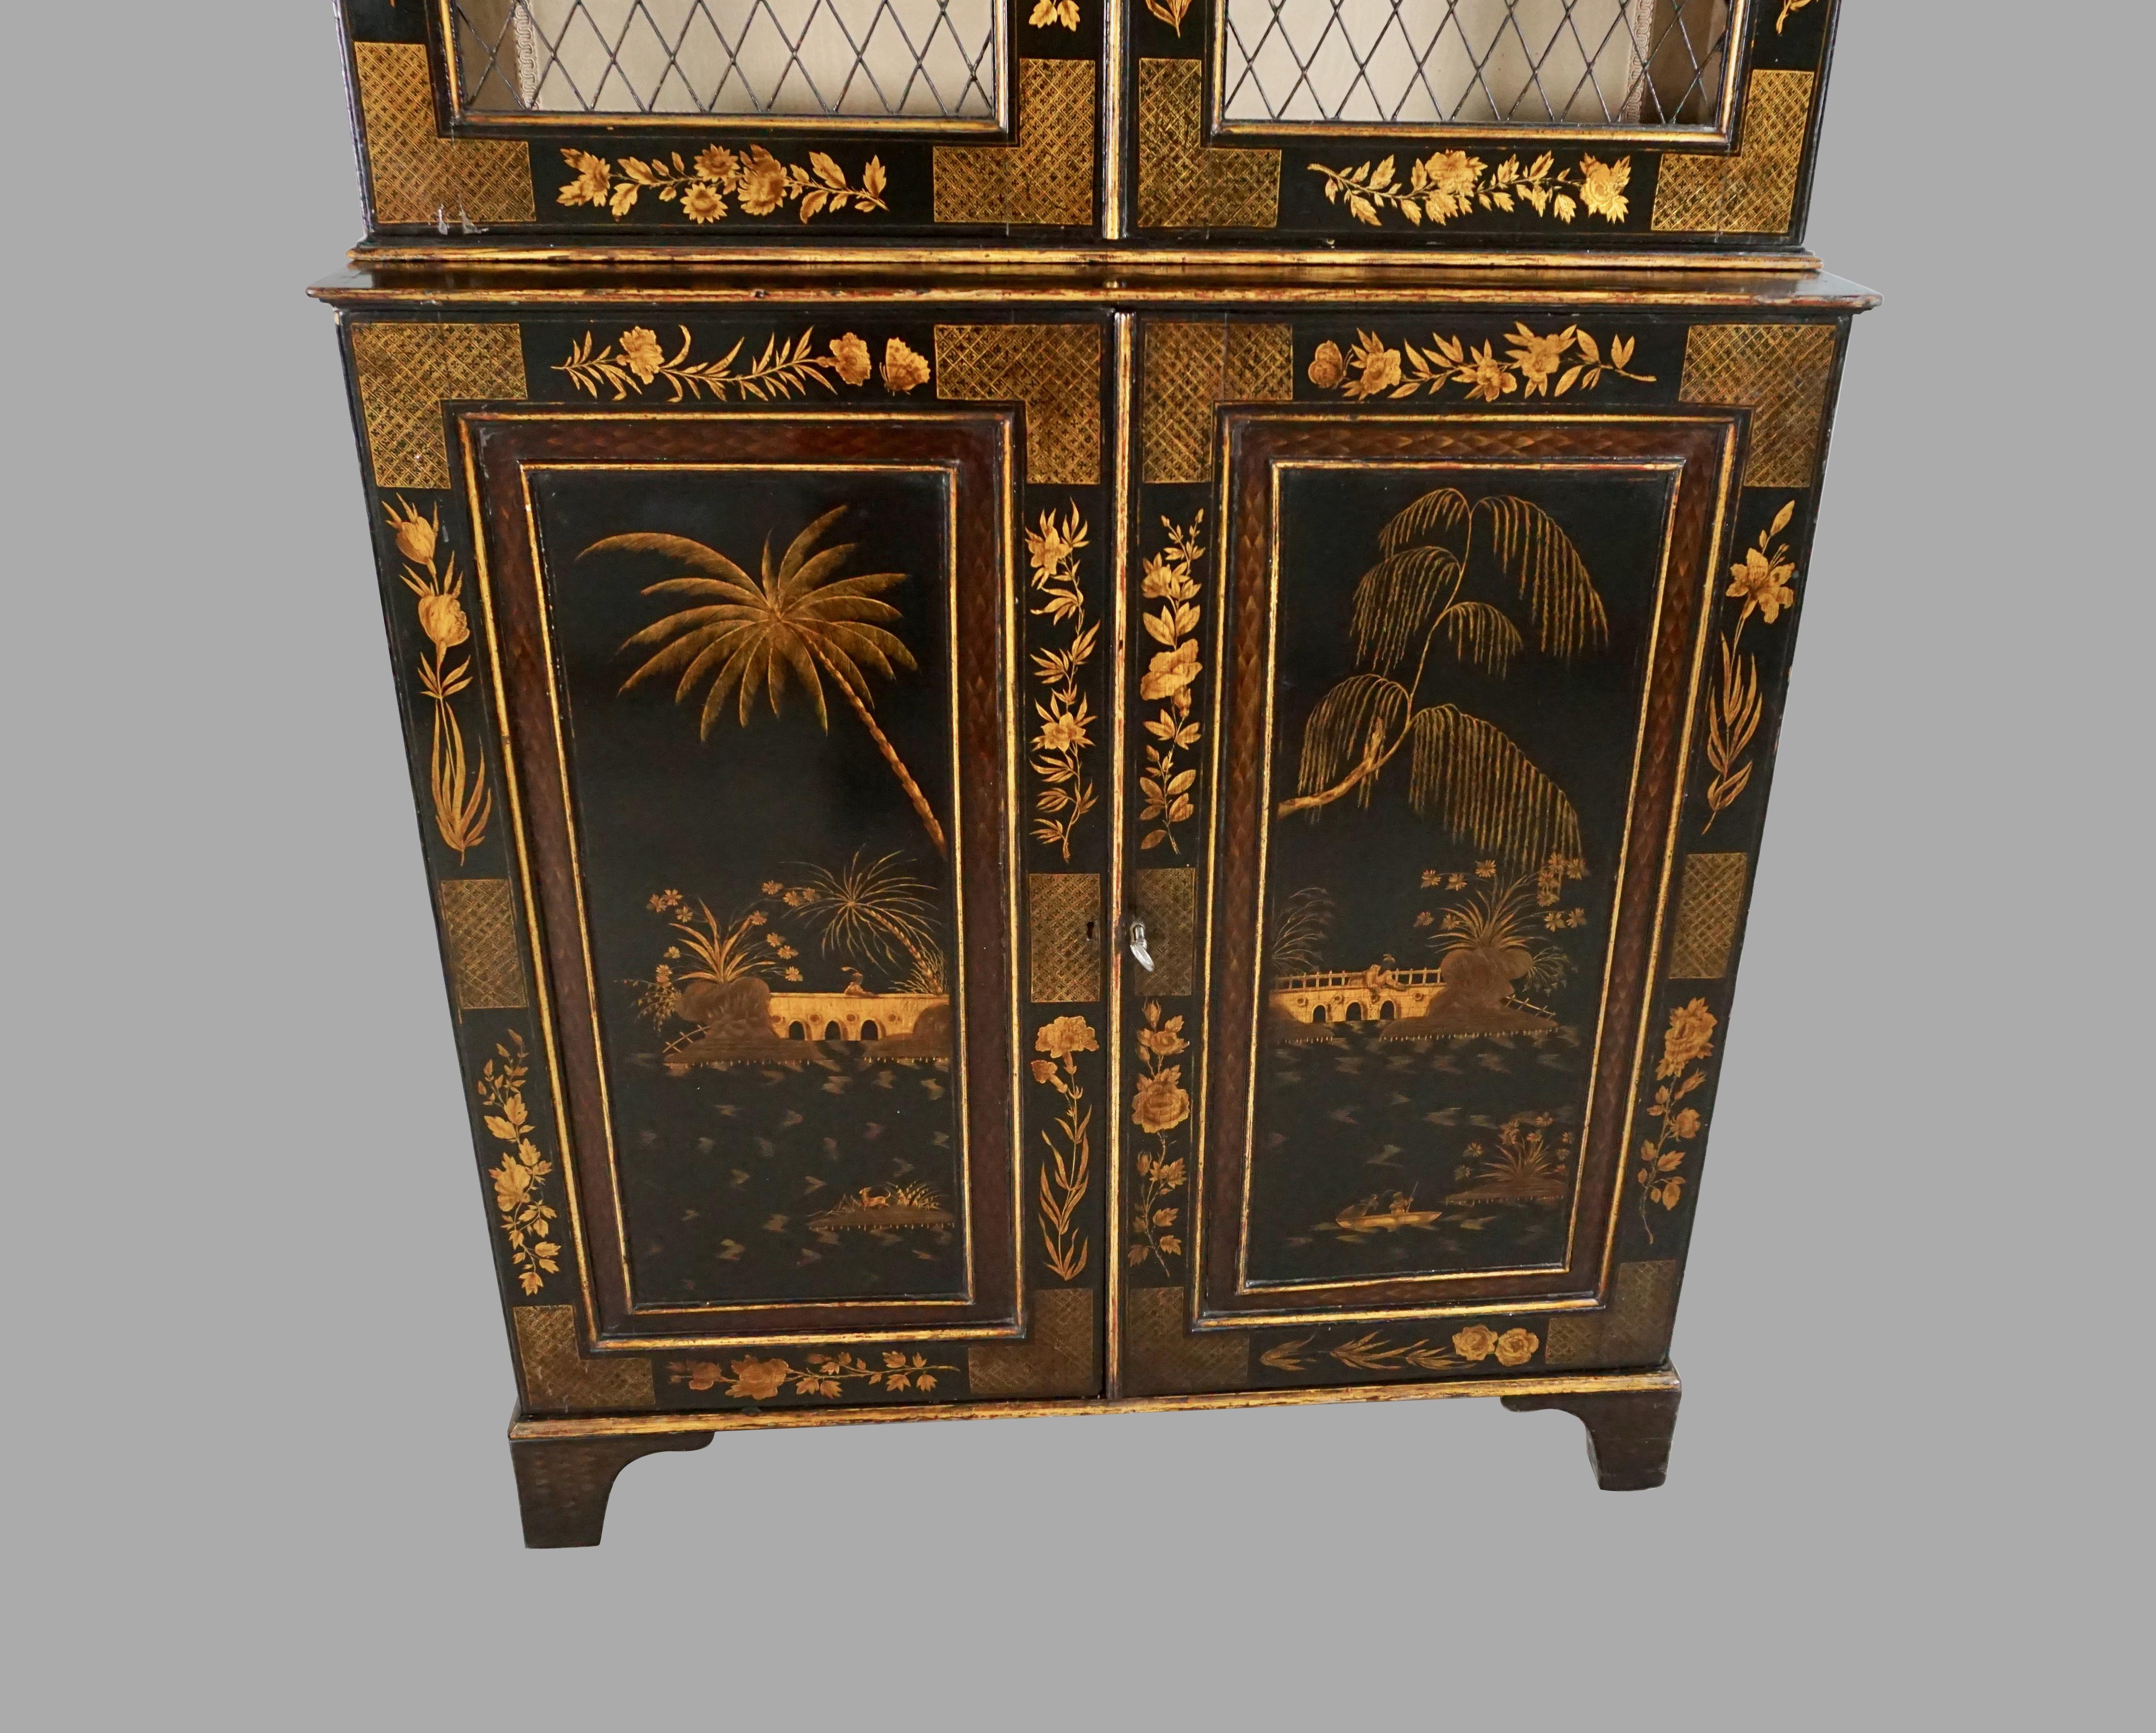 Mid-19th Century English Regency Chinoiserie Black and Gilt Bookcase Cabinet